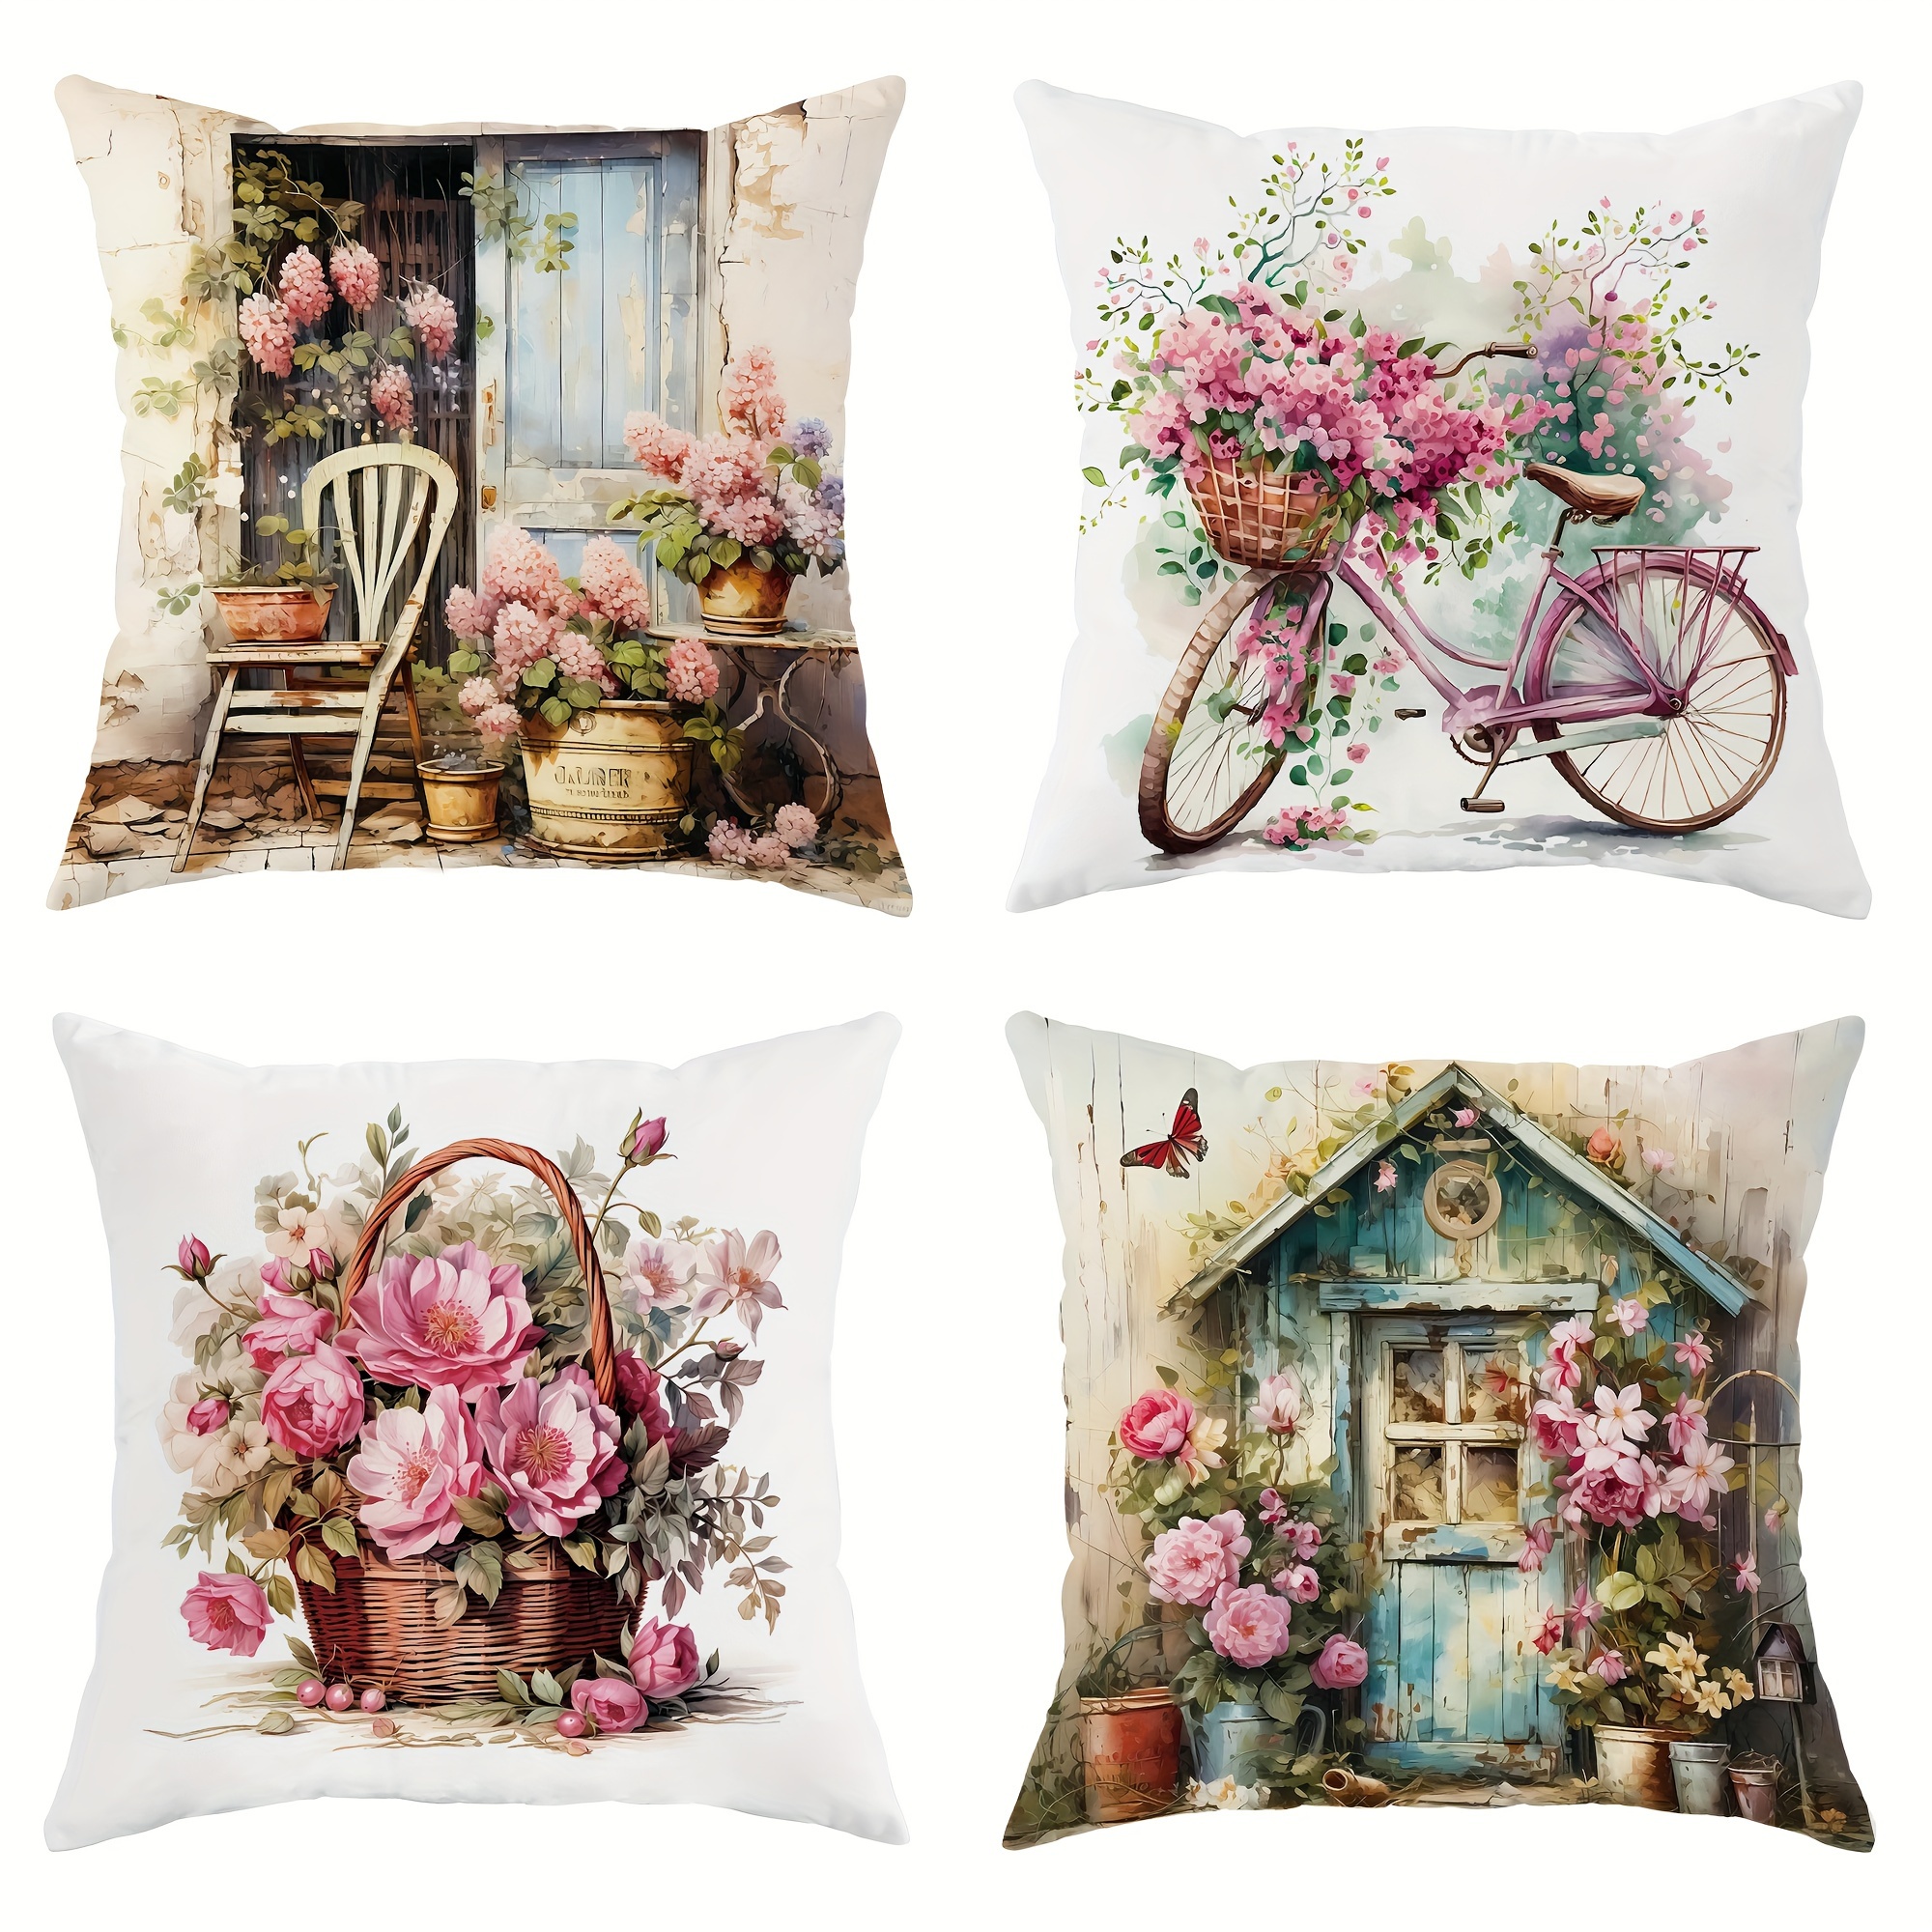 

4-piece Spring Farmhouse Velvet Throw Pillow Covers Set - Bicycle & Flower Basket Design, Green & Pink, Zip Closure - Perfect For Living Room, Bedroom, Sofa Decor